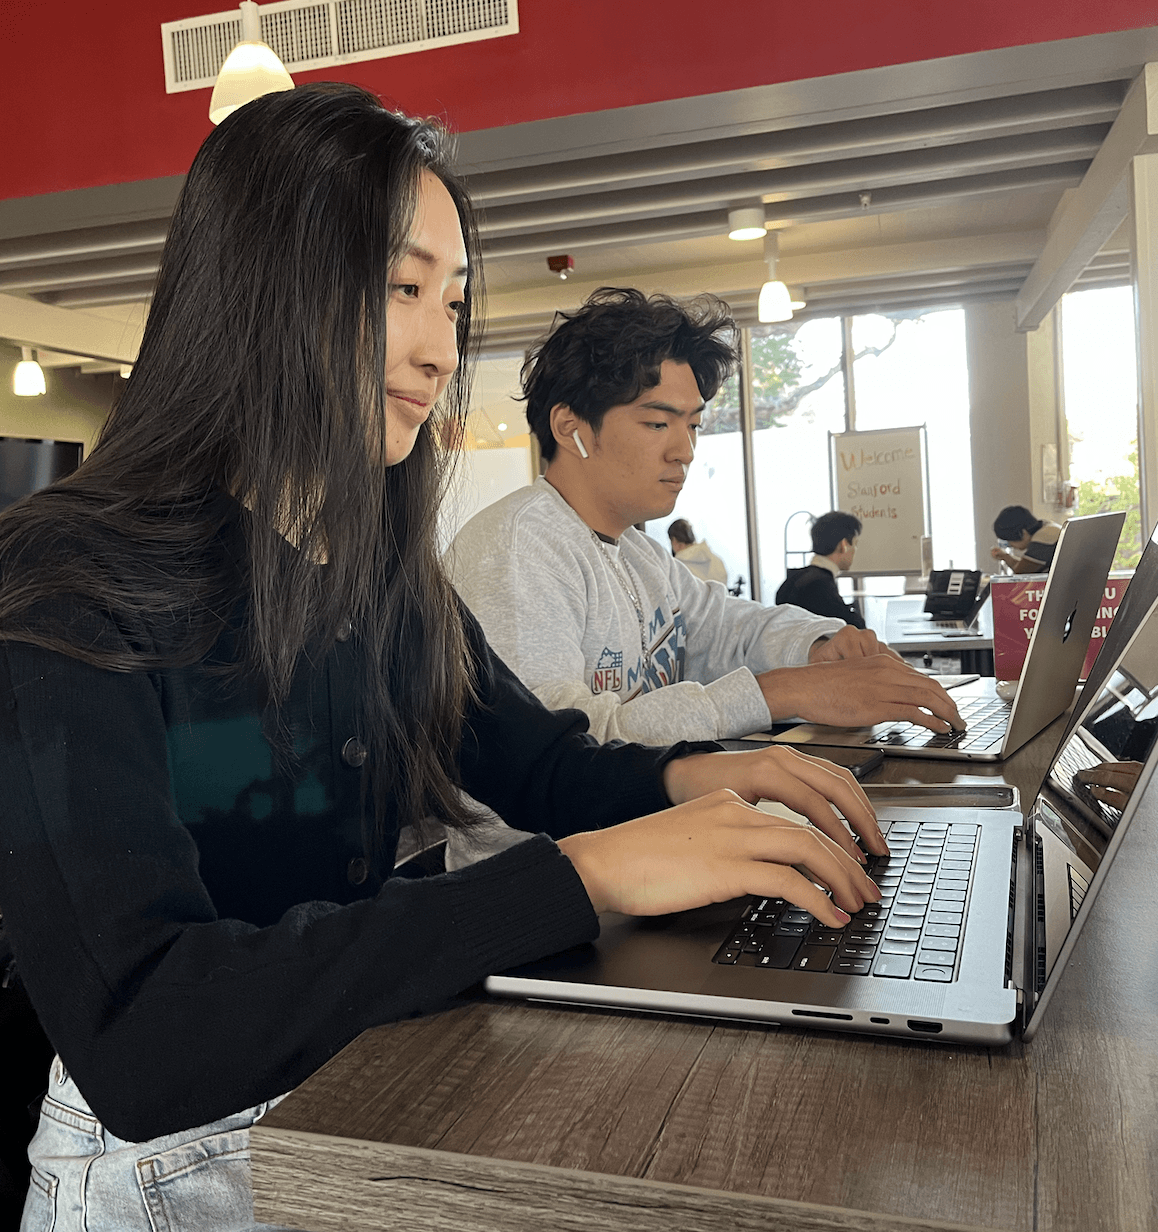 A young Asian woman types on a laptop with a small smile on her face. A young Asian man next to her with earbuds in does the same.